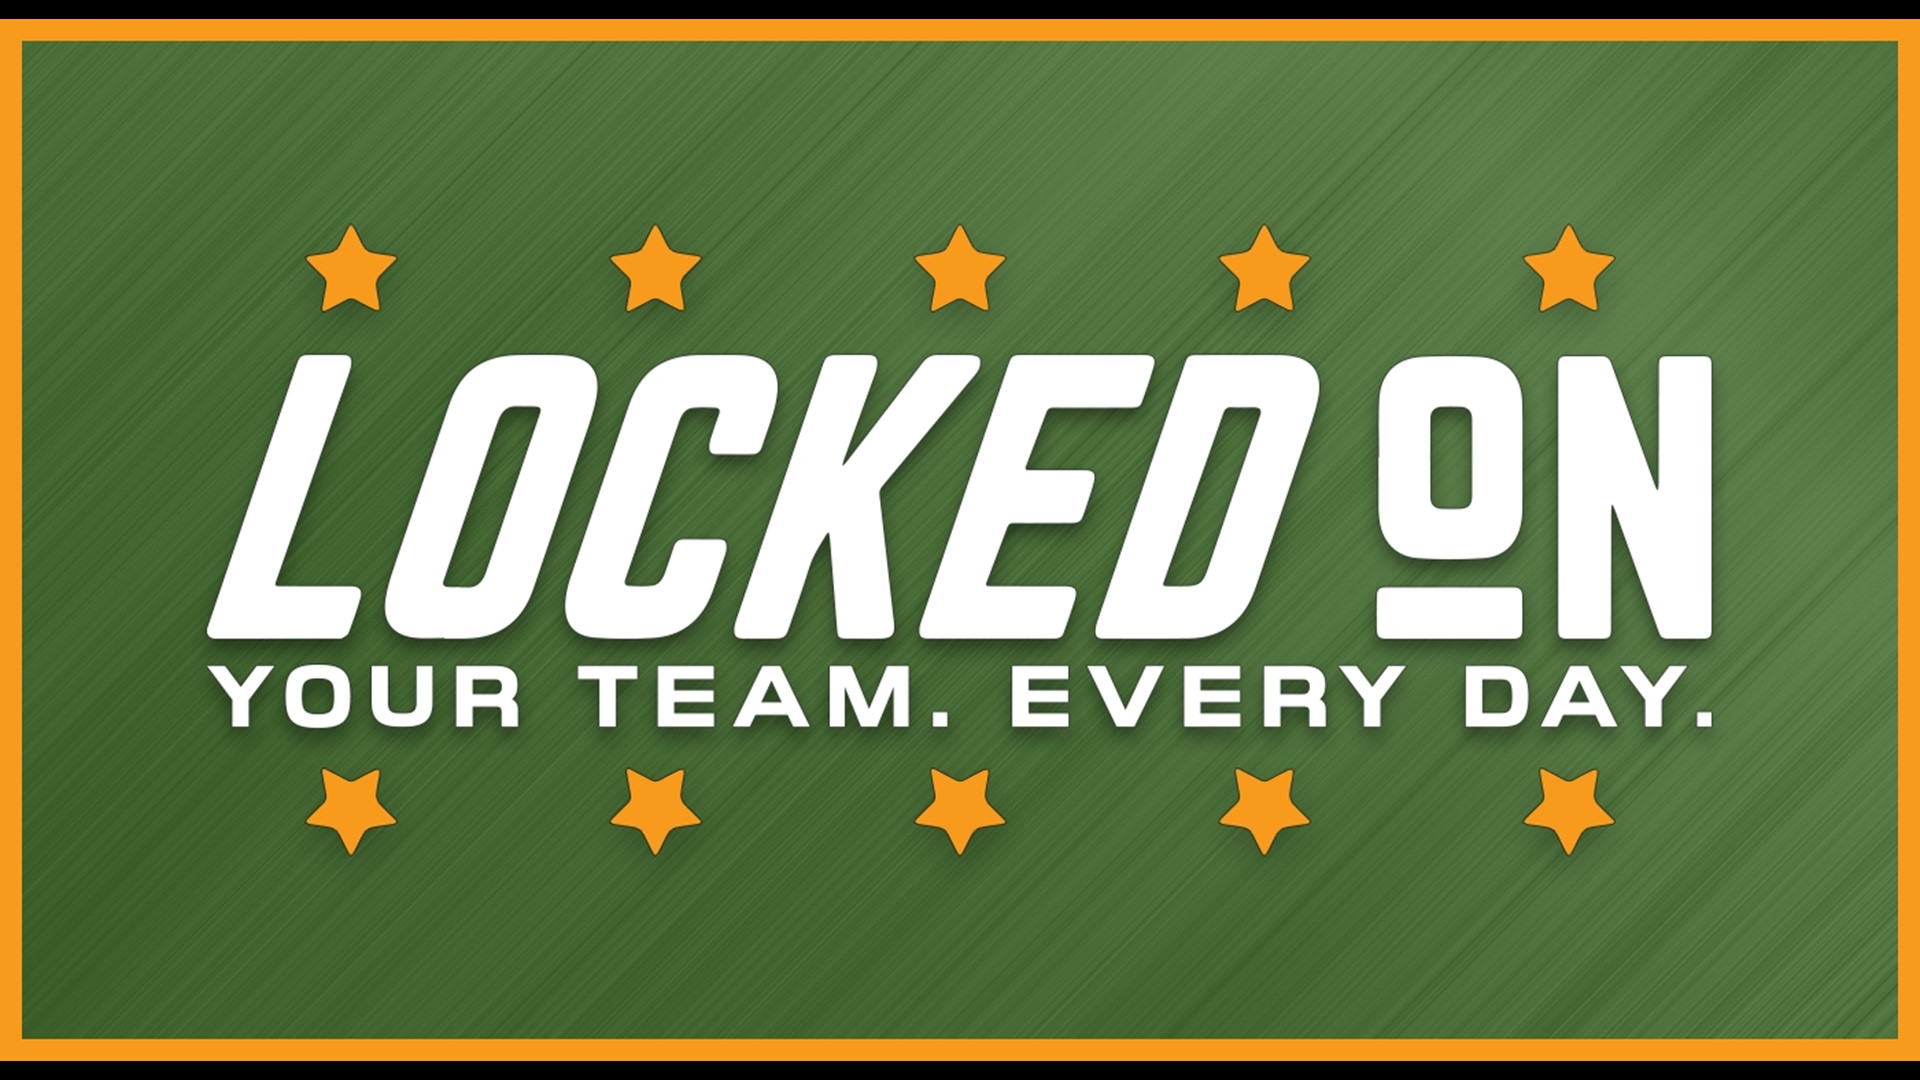 Locked On Bucks hosts Justin Garcia & Camille Davis discuss the Milwaukee Bucks letting go of their head coach, if Doc Rivers is the right replacement, and more.